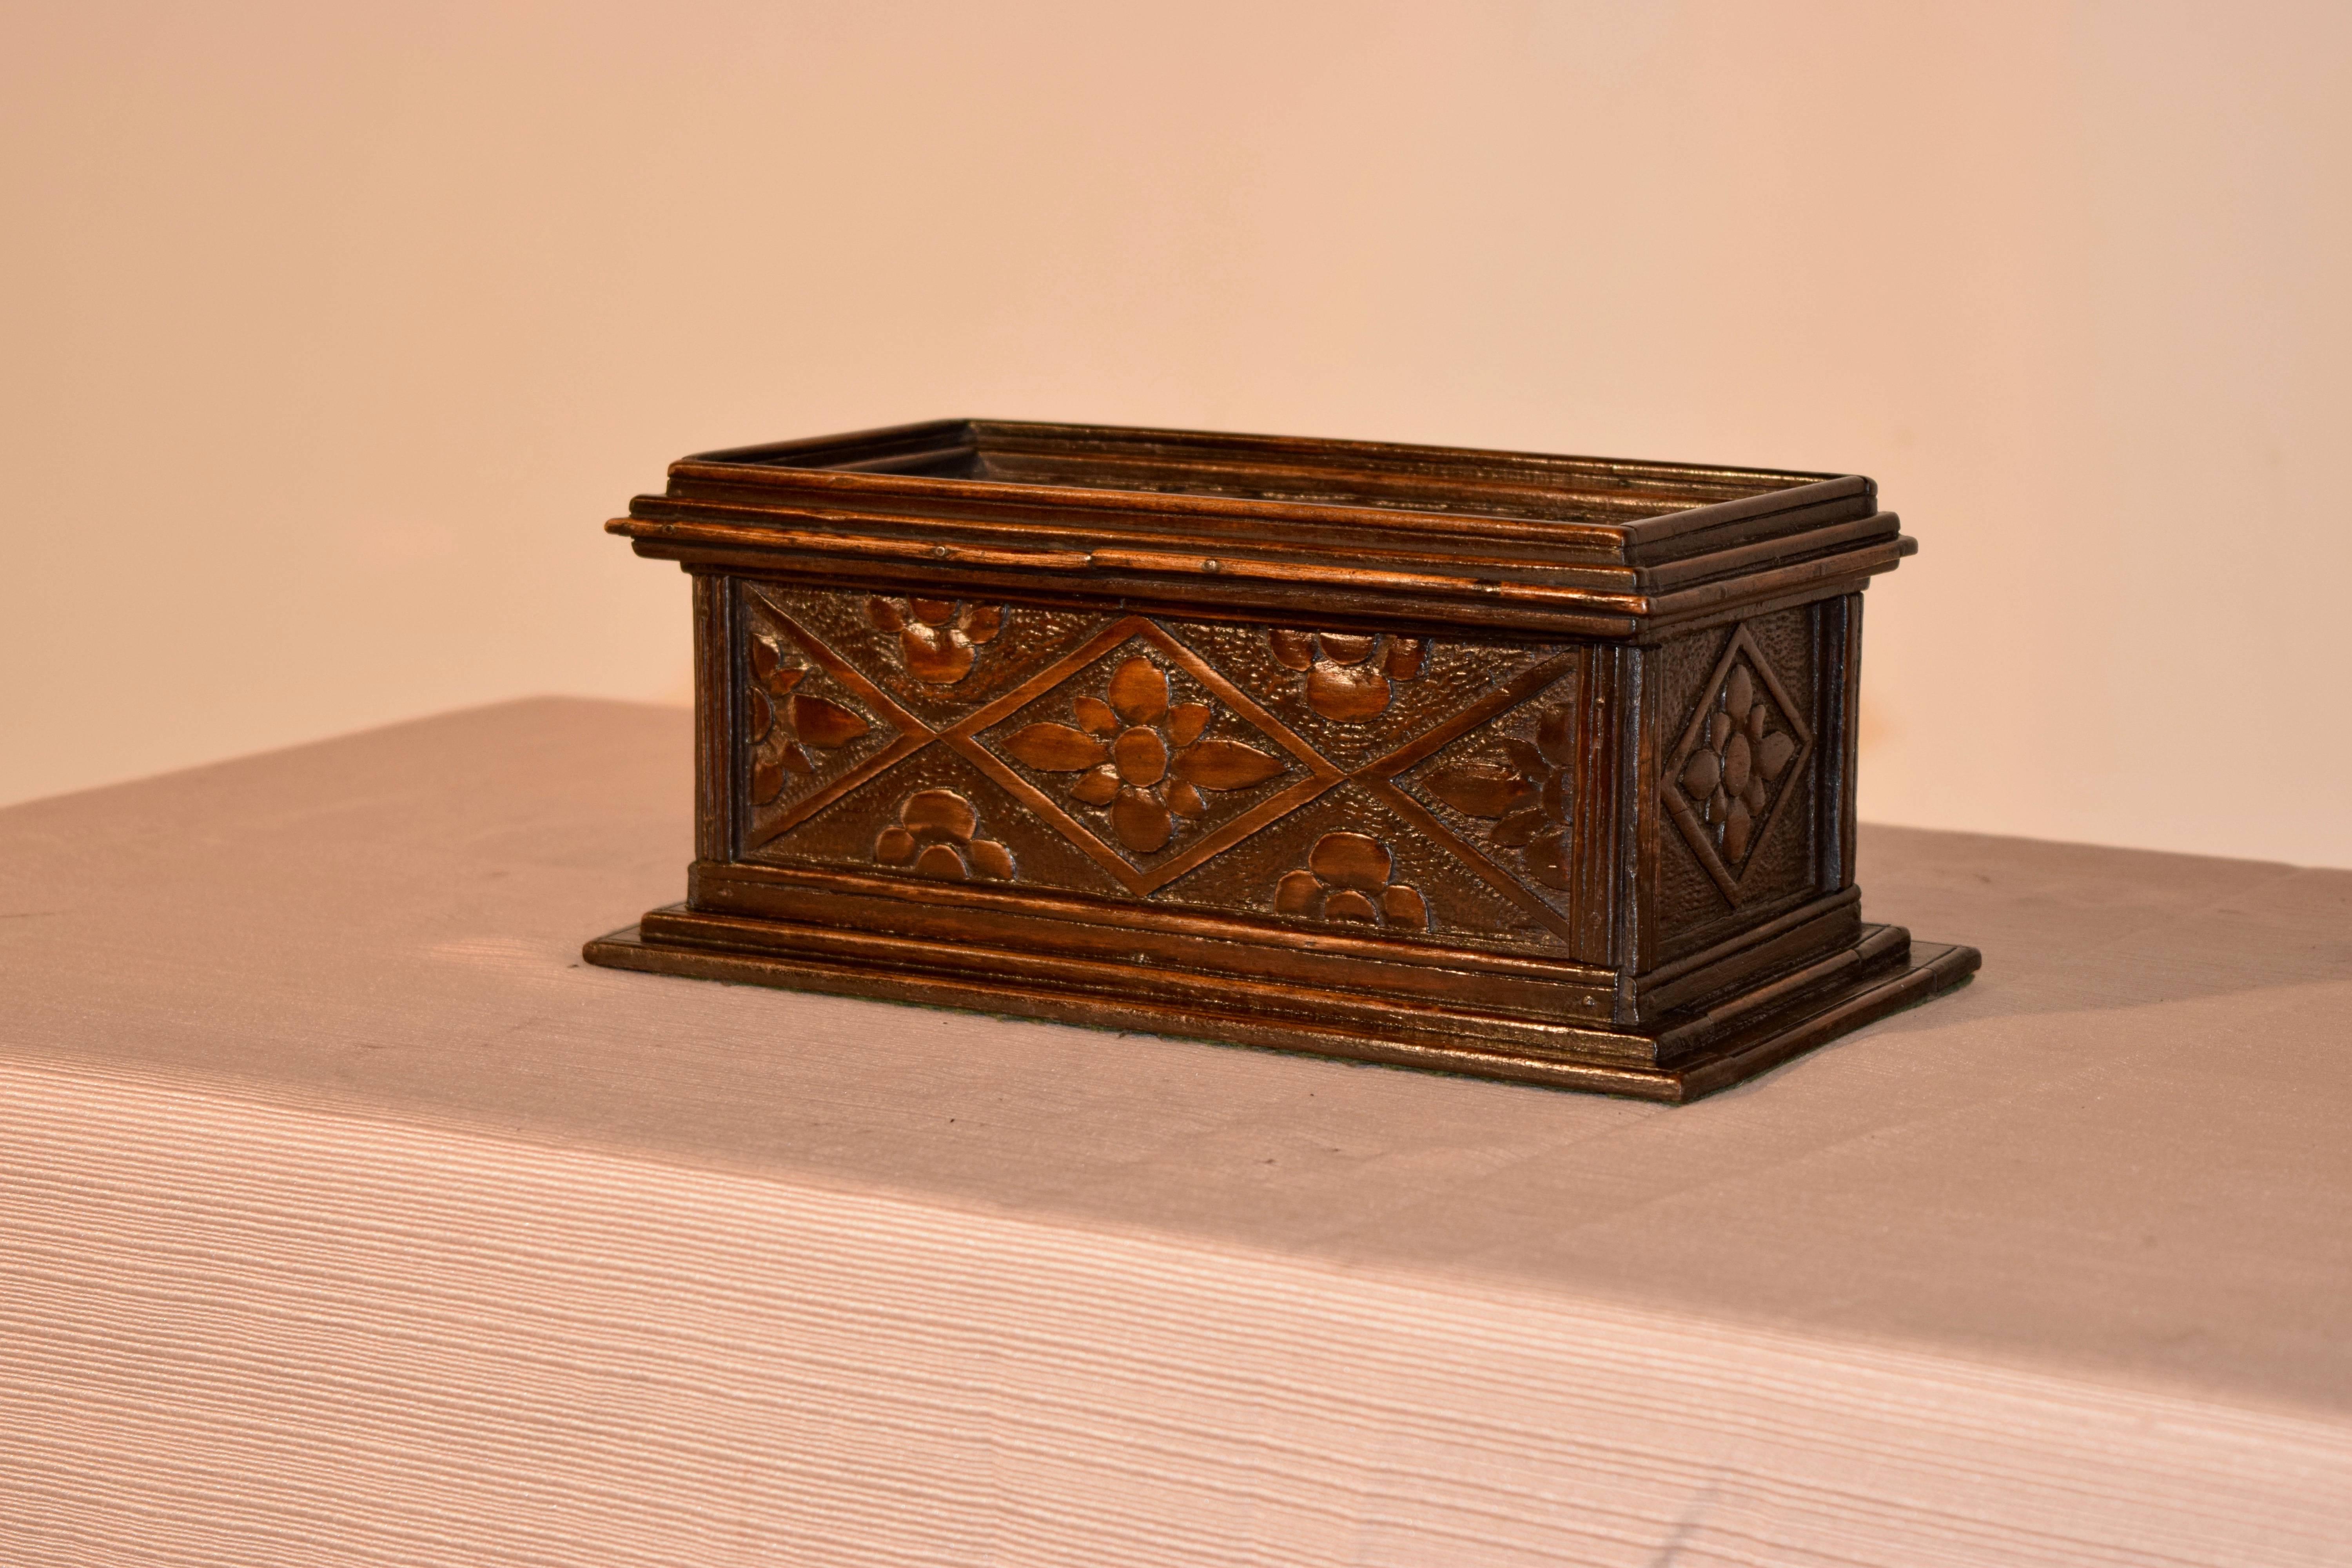 19th century English carved box made from oak. It has molded edges and hand-carved carved decorated sides and top. The top lifts to reveal storage.
 